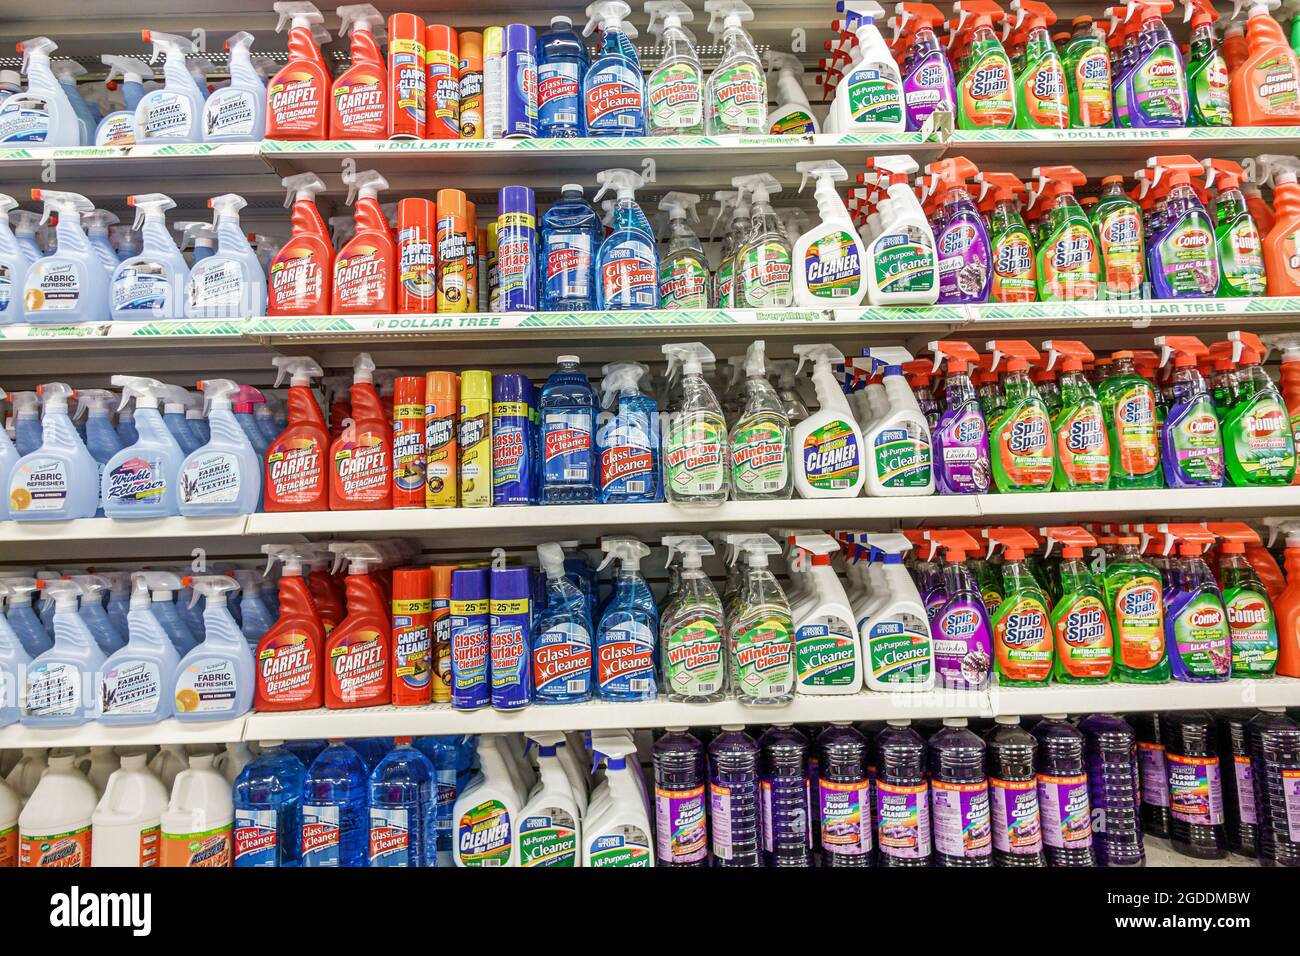 Florida Naples Dollar Tree discount store display sale cleaning products,carpet glass all-purpose cleaner Spic & Span spray bottles,shelves interior i Stock Photo